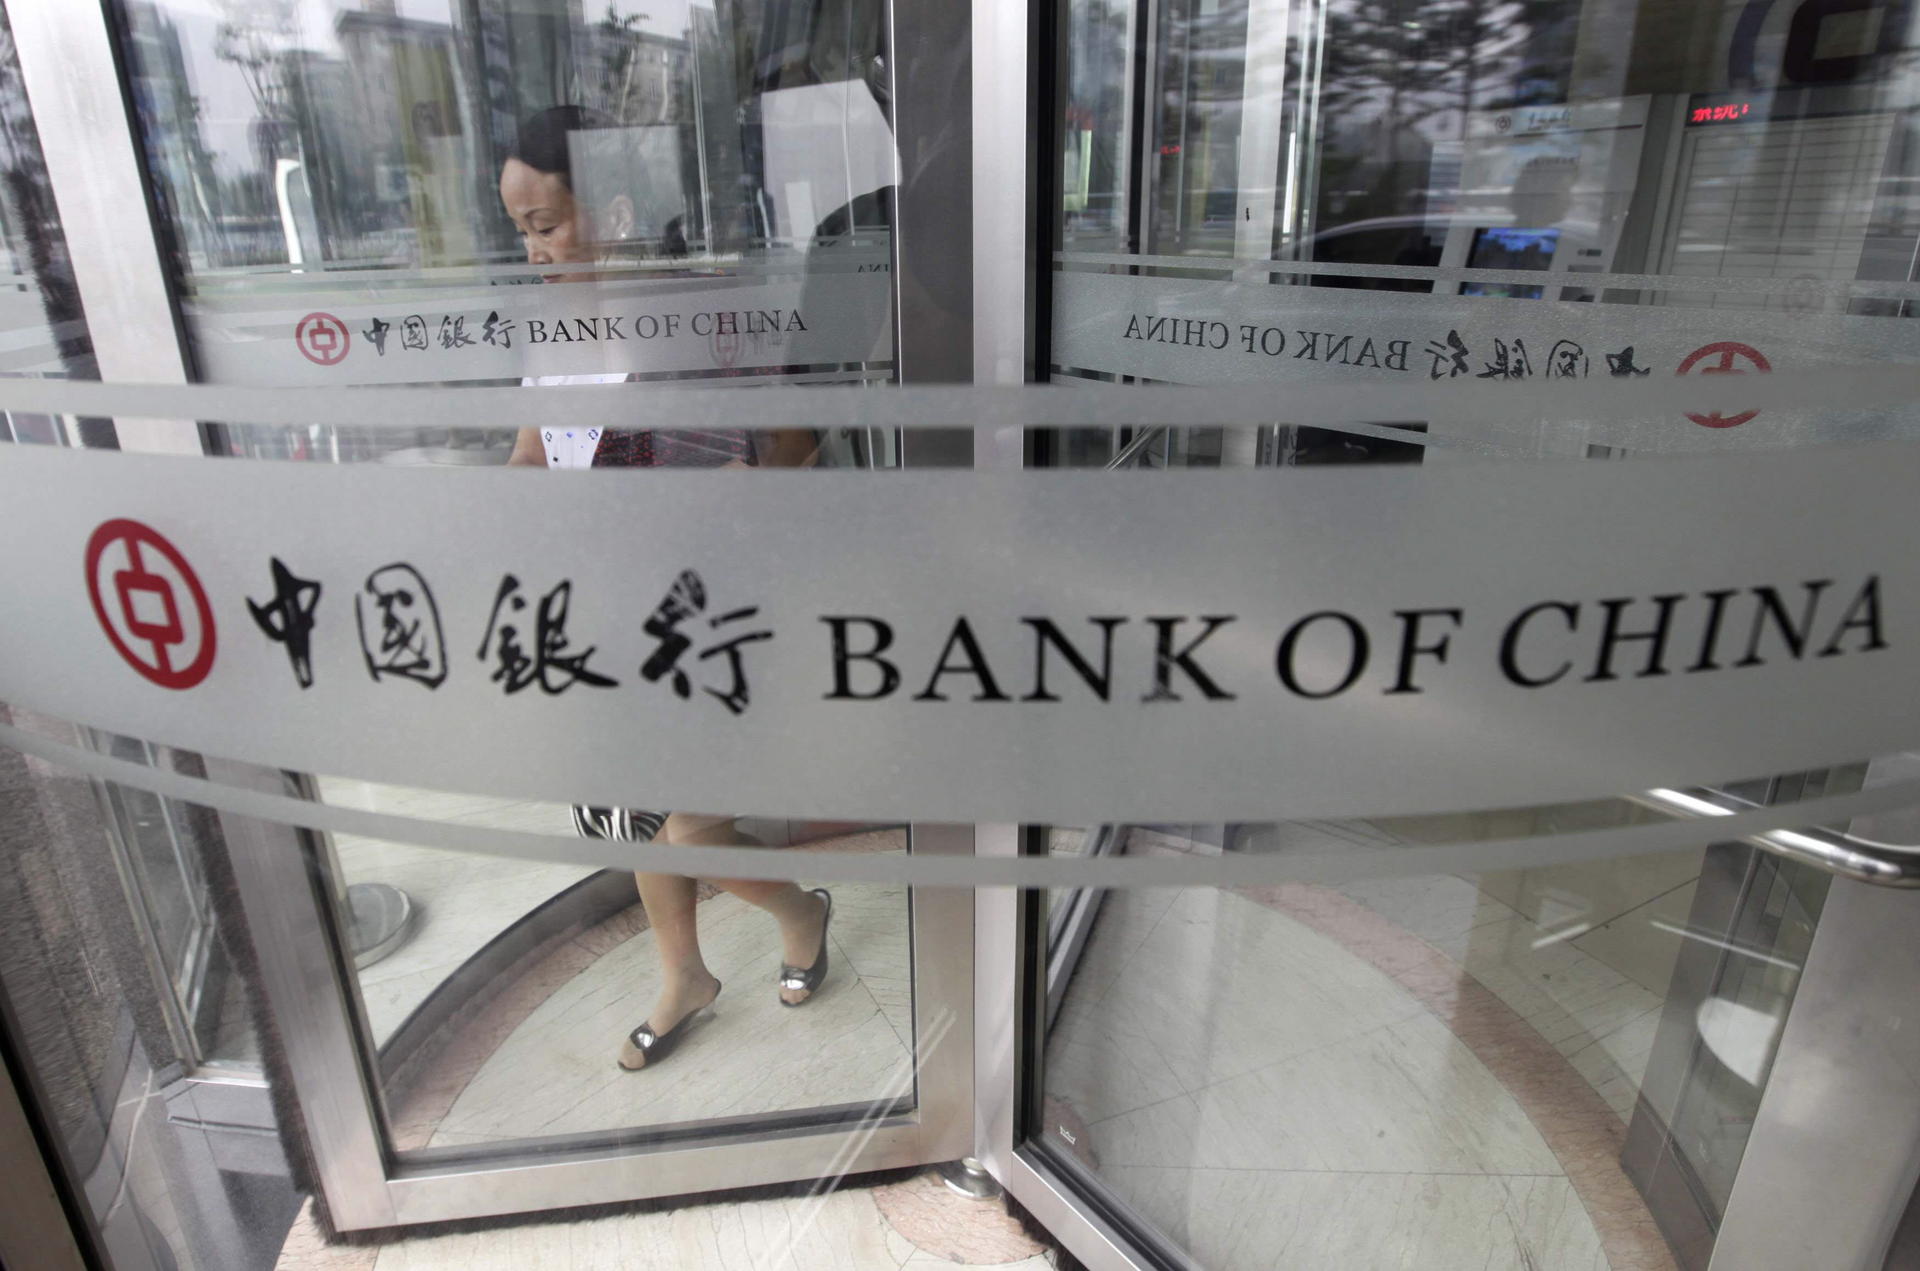 For lenders such as Bank of China, much of the fundraising done overseas could be handled by the head office. Photo: Reuters